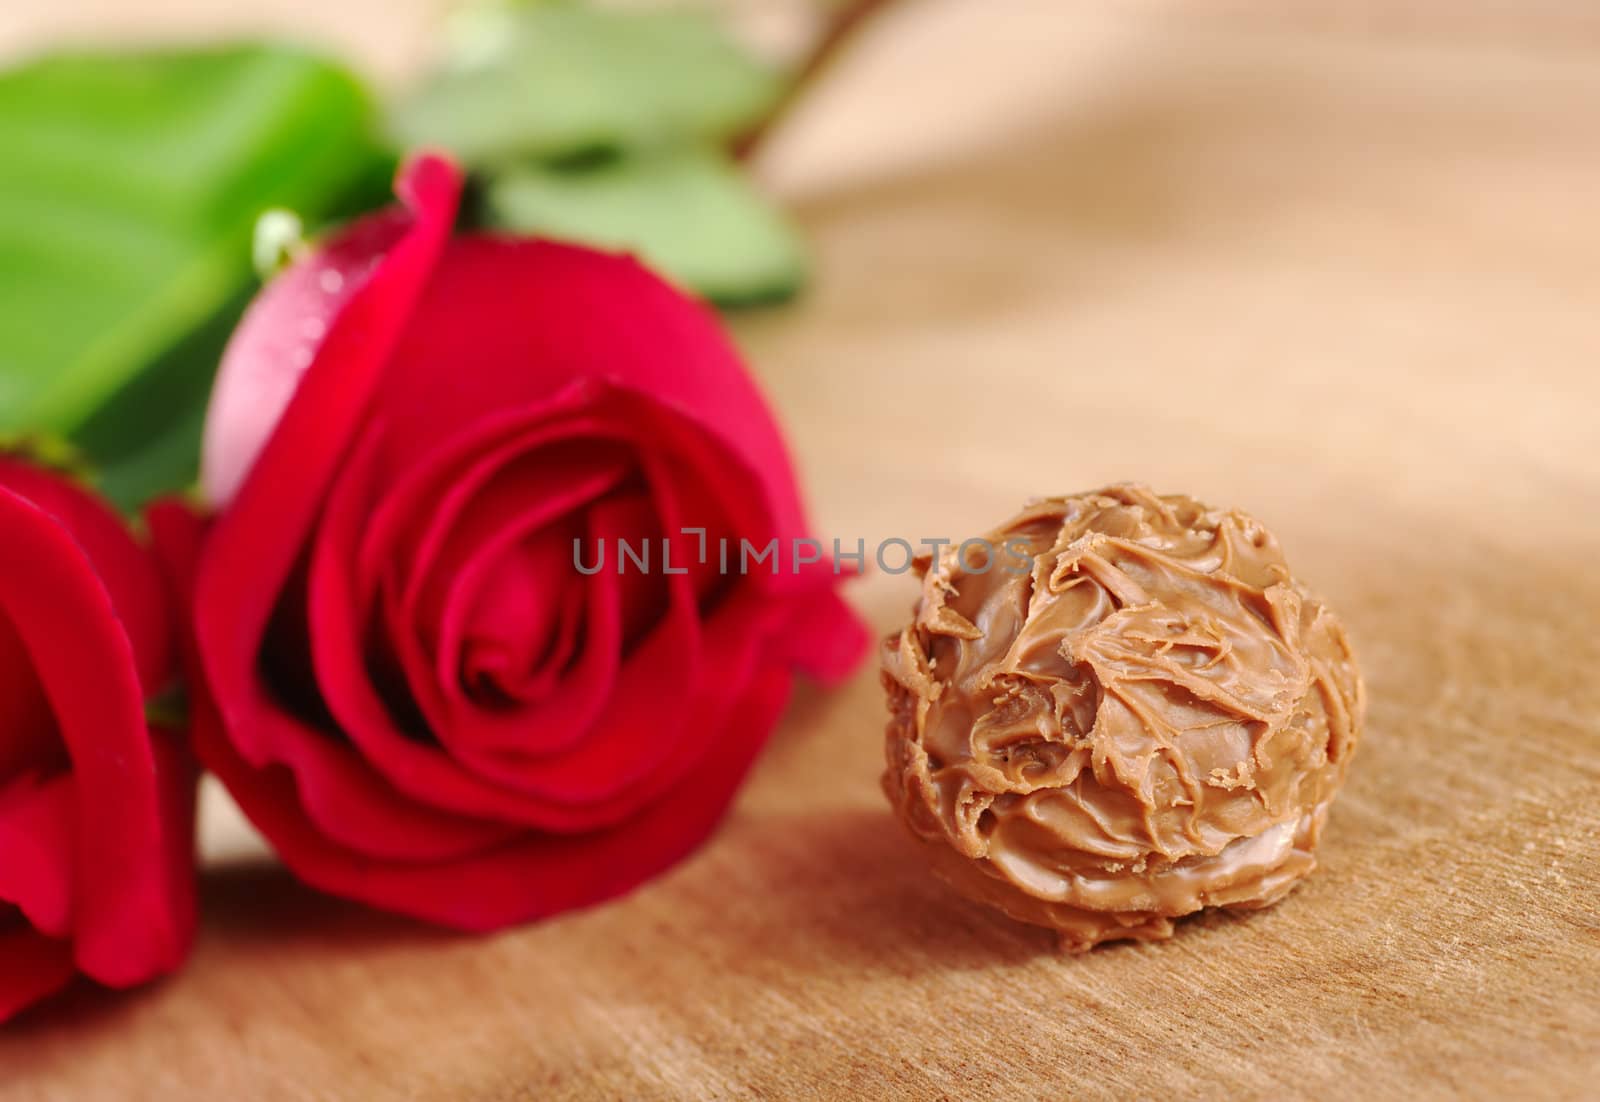 Truffle with Red Rose by ildi